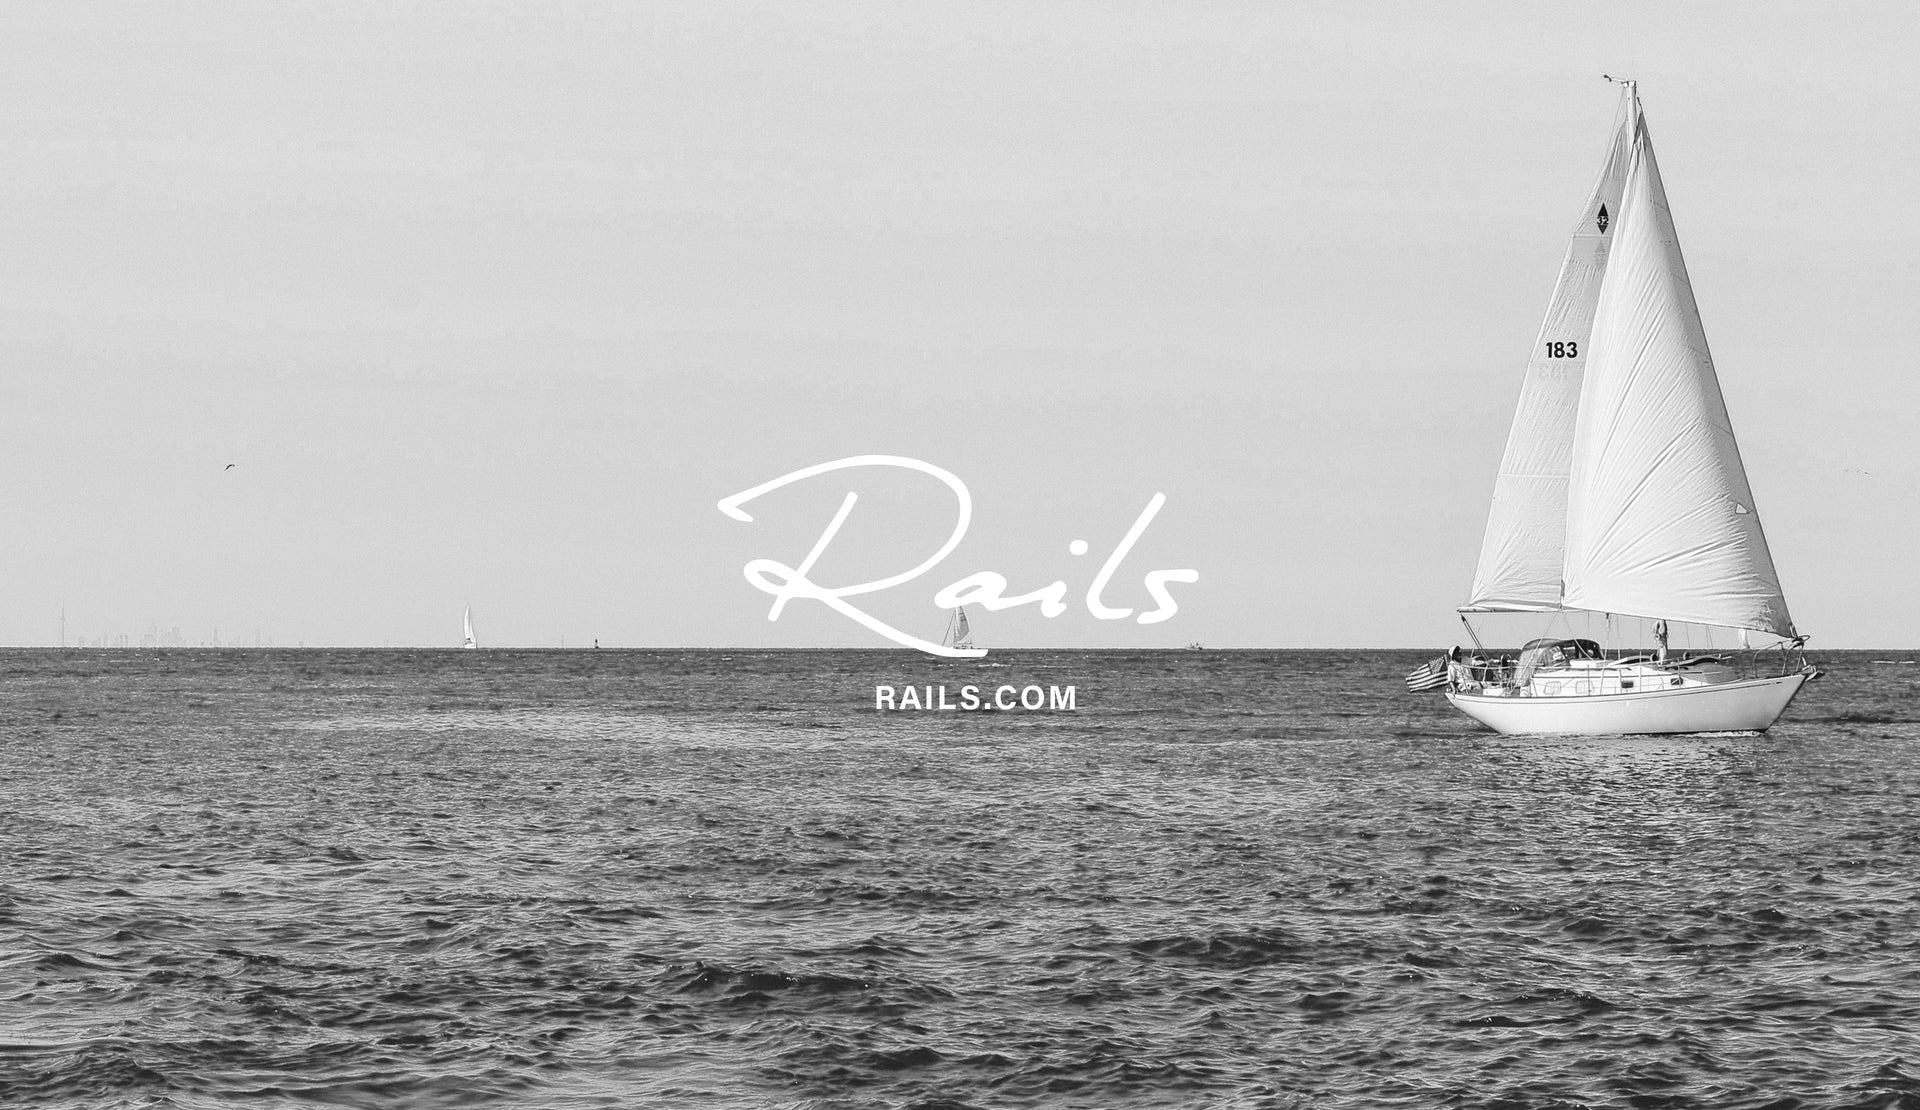 EDITORIAL IMAGE OF THE OCEAN WITH A SAIL BOAT